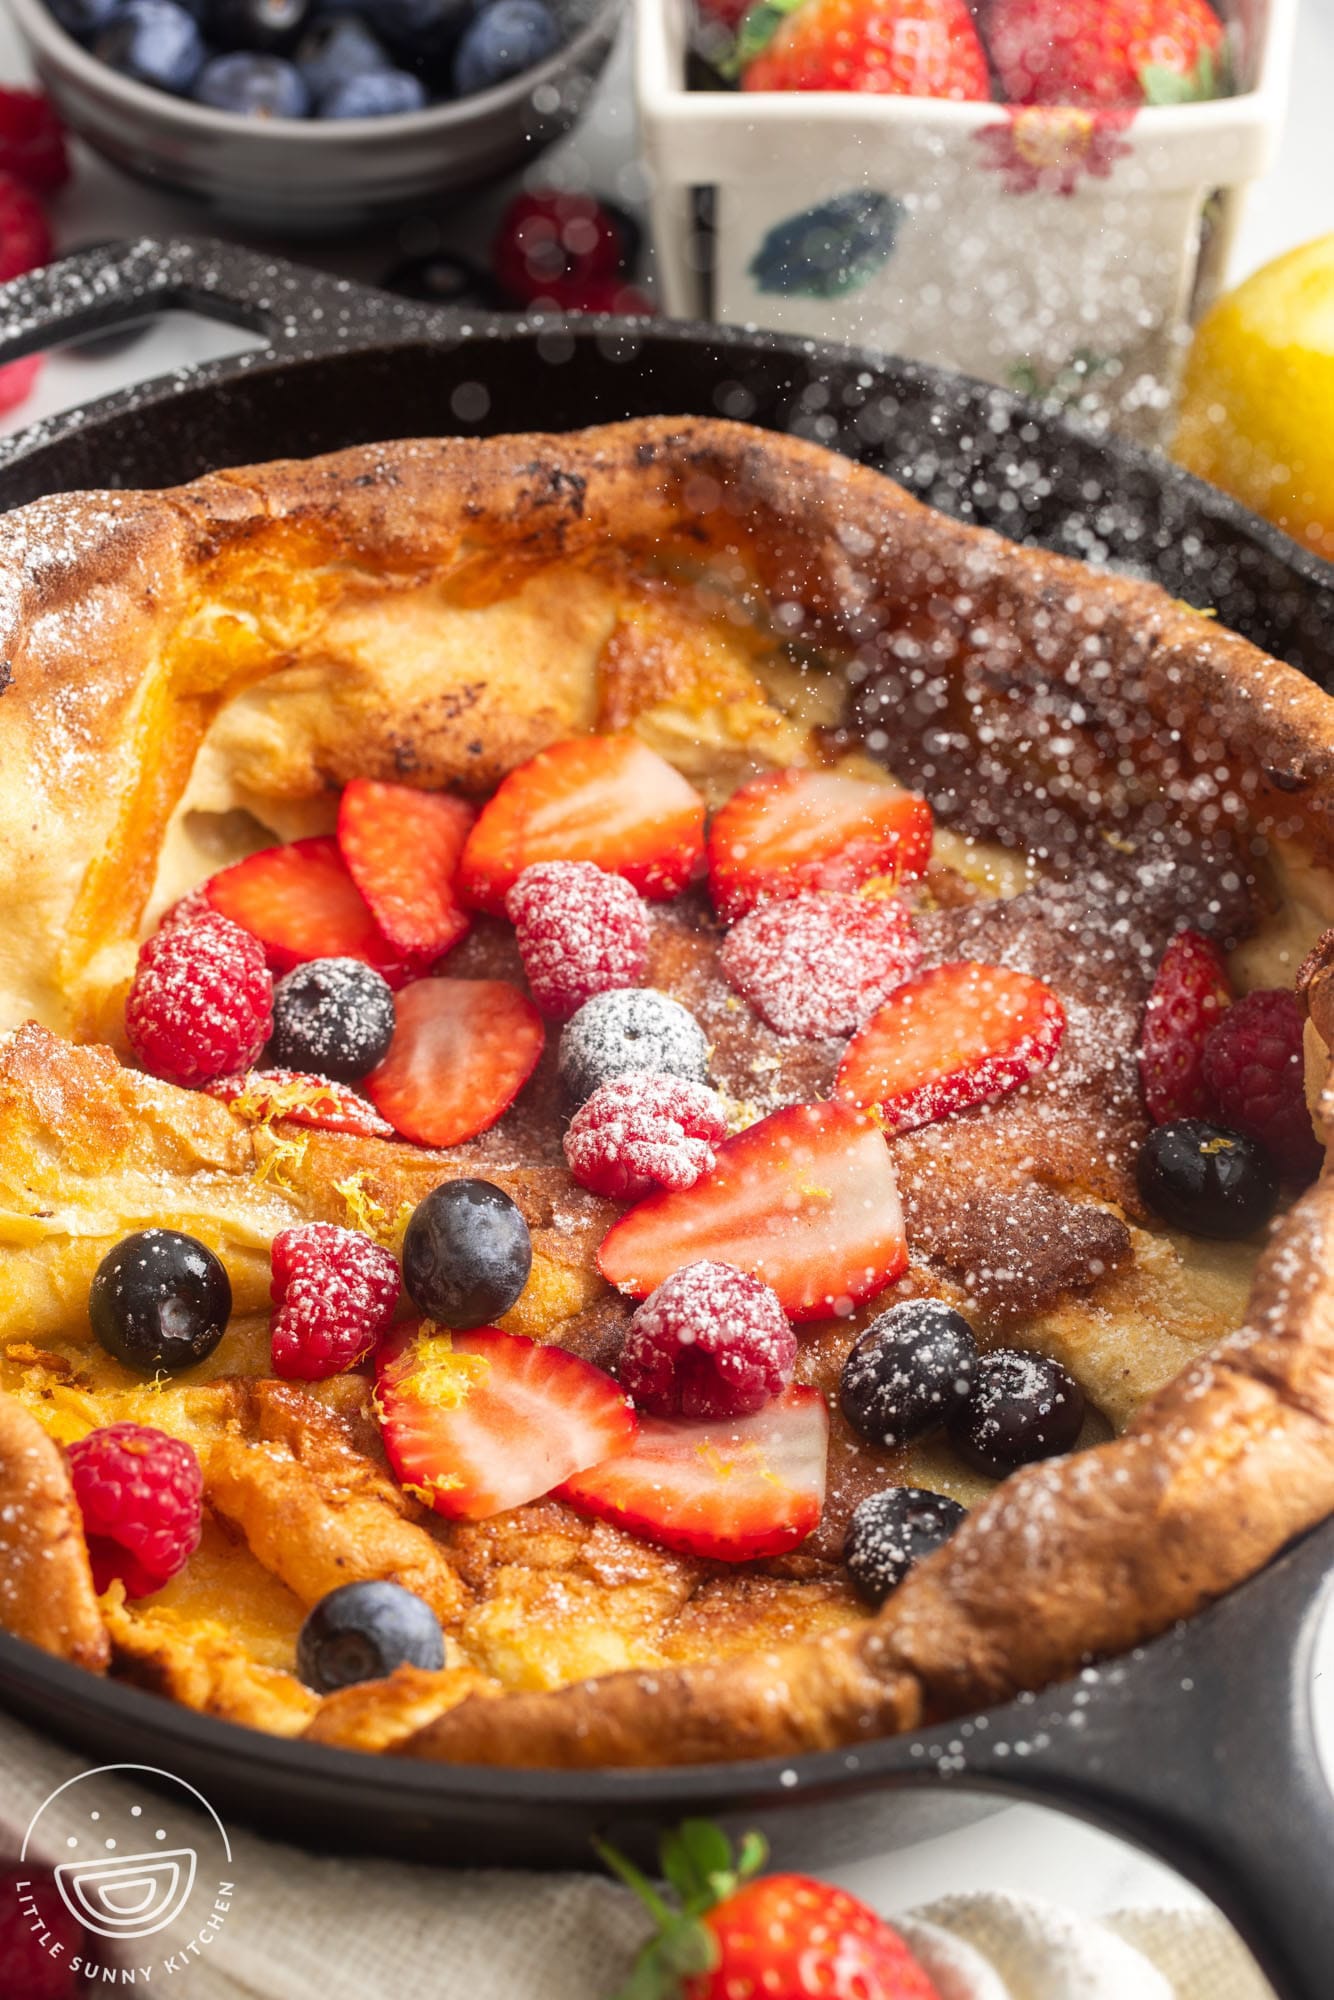 powdered sugar dusted over a freshly cooked dutch baby pancake, topped with fresh berries and lemon zest.